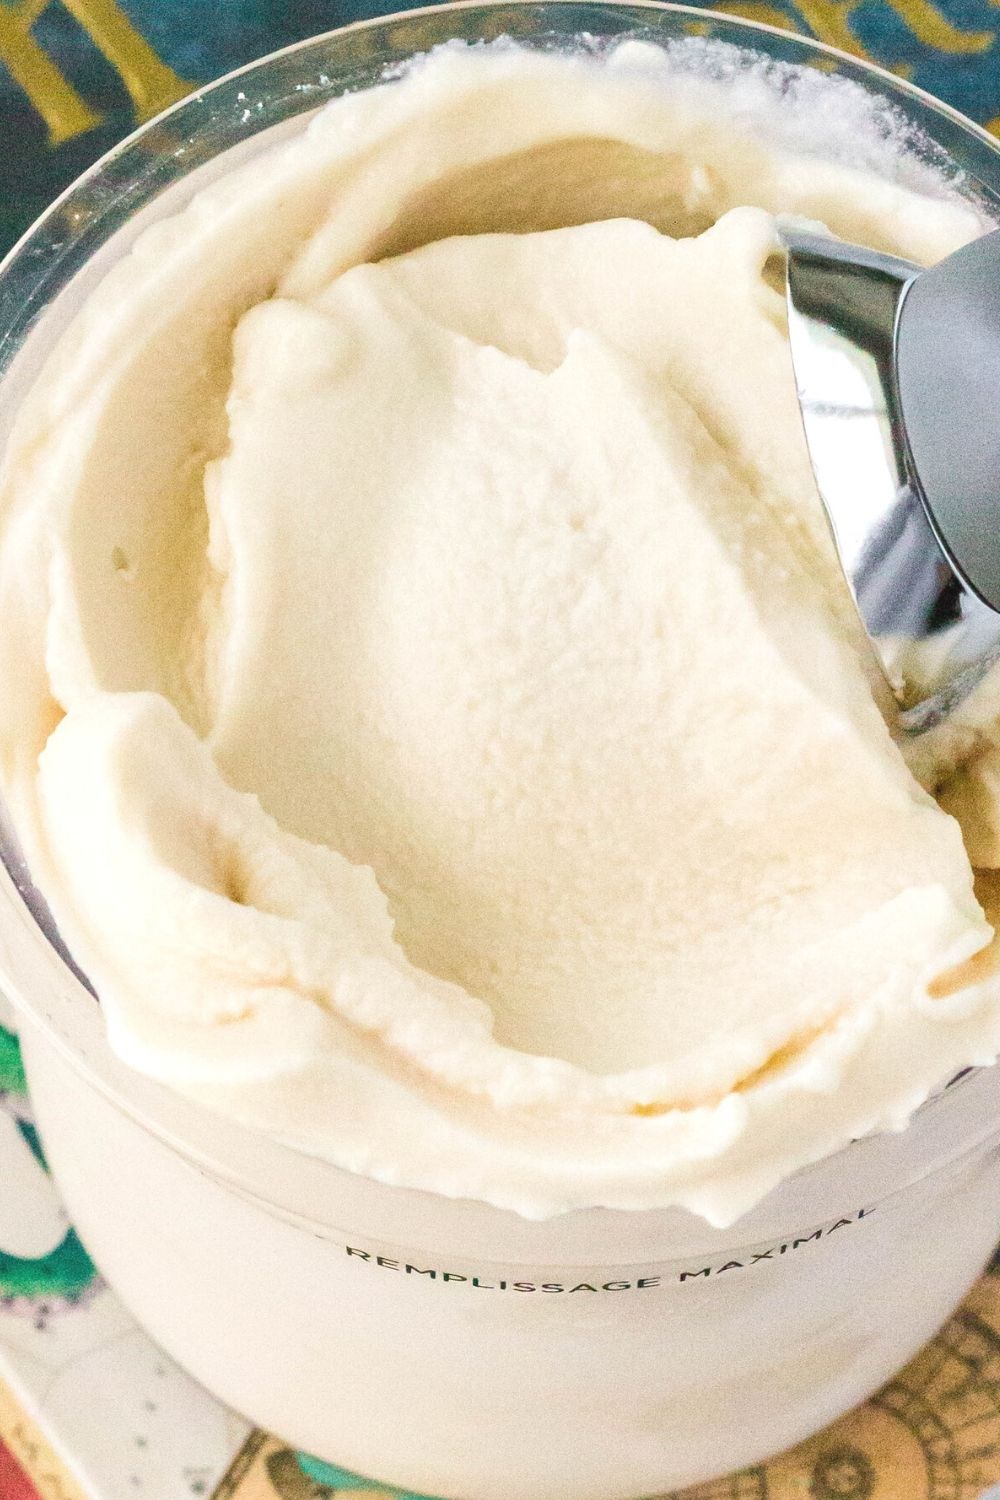 close-up of the top of a Ninja Creami ice cream pint filled with butterbeer ice cream. An ice cream scoop is swirling the top of the ice cream.